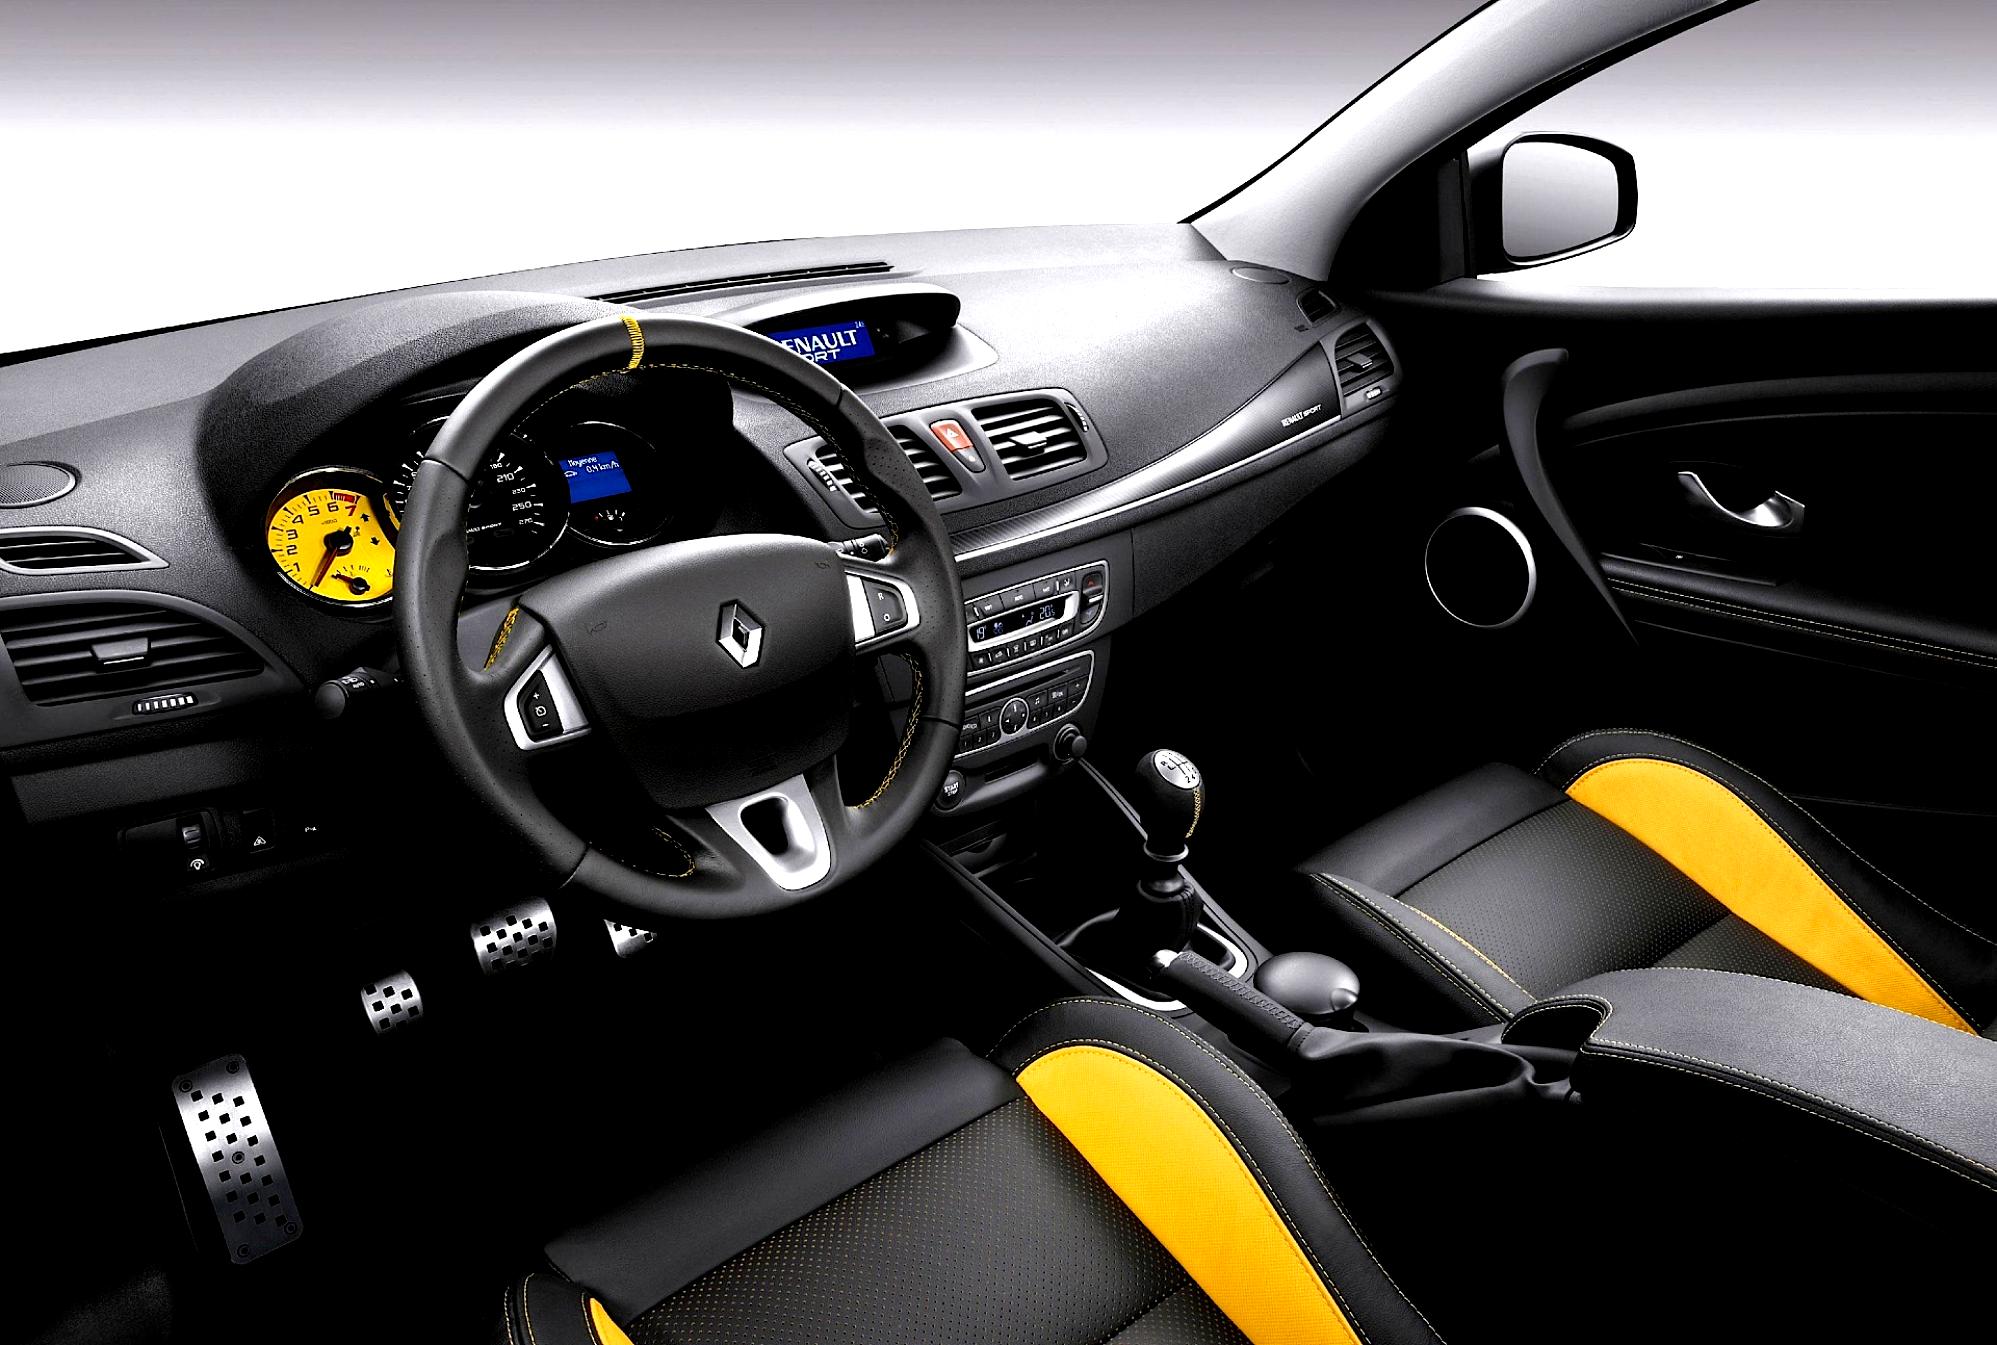 Renault Megane RS Coupe 2009 #74